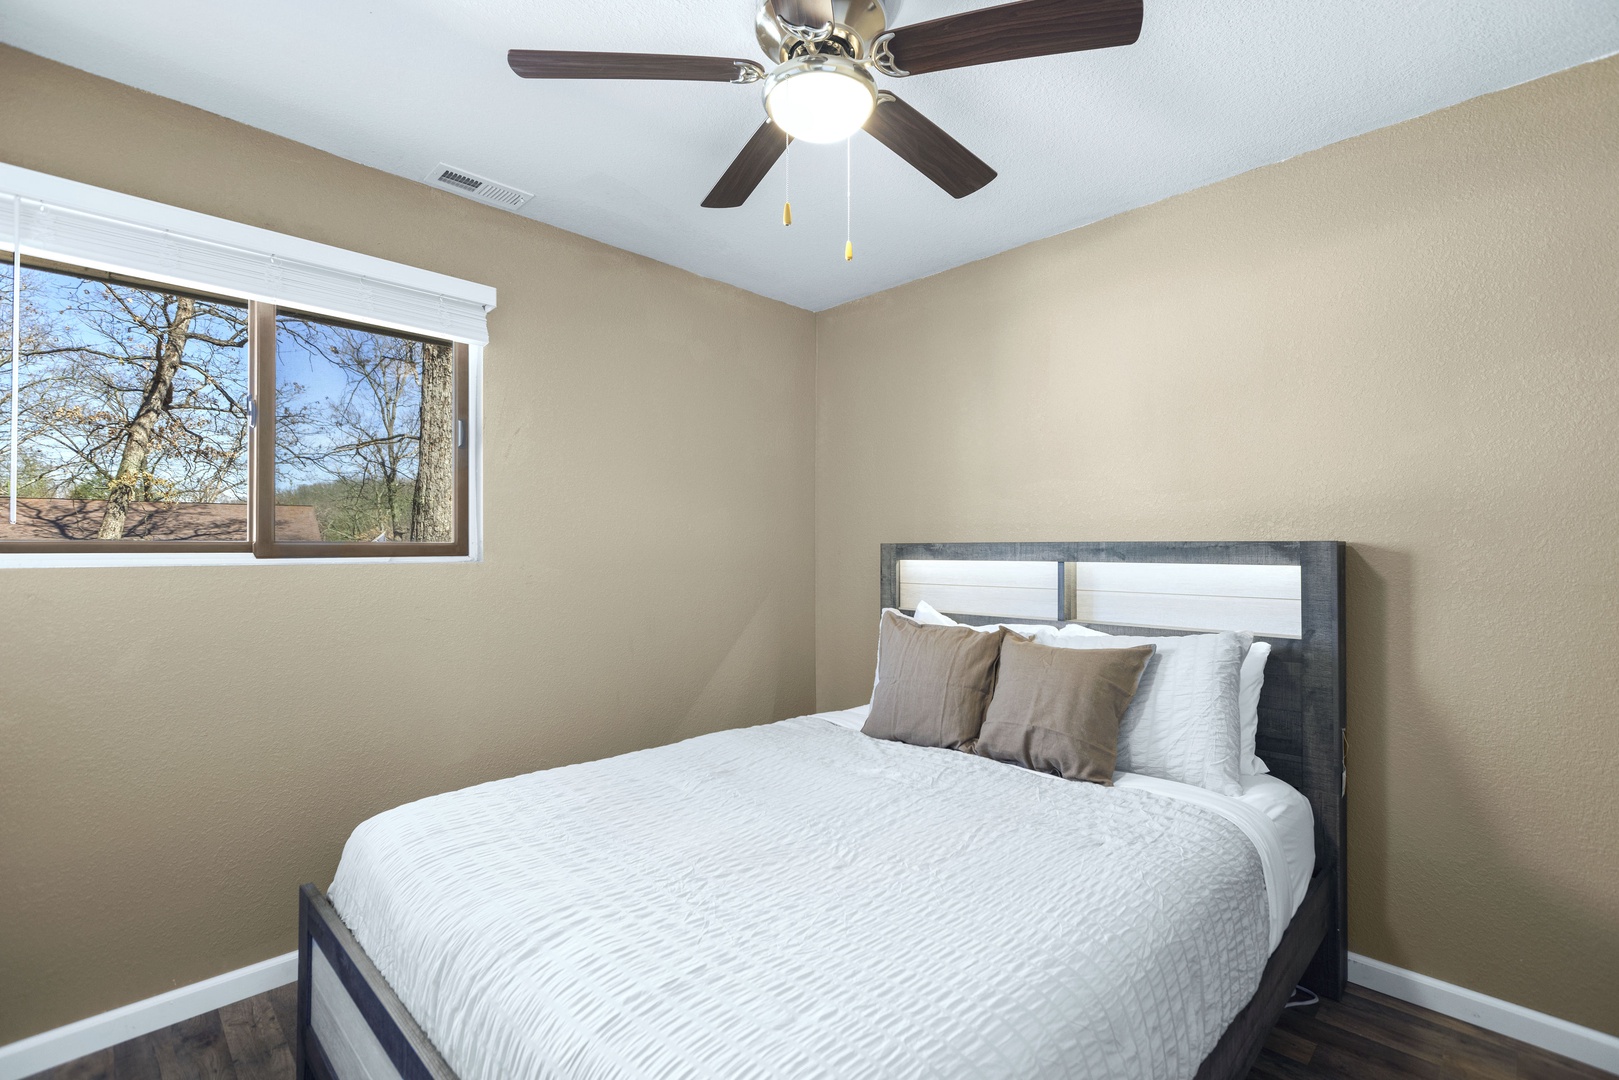 This bedroom retreat offers a queen-sized bed & ceiling fan